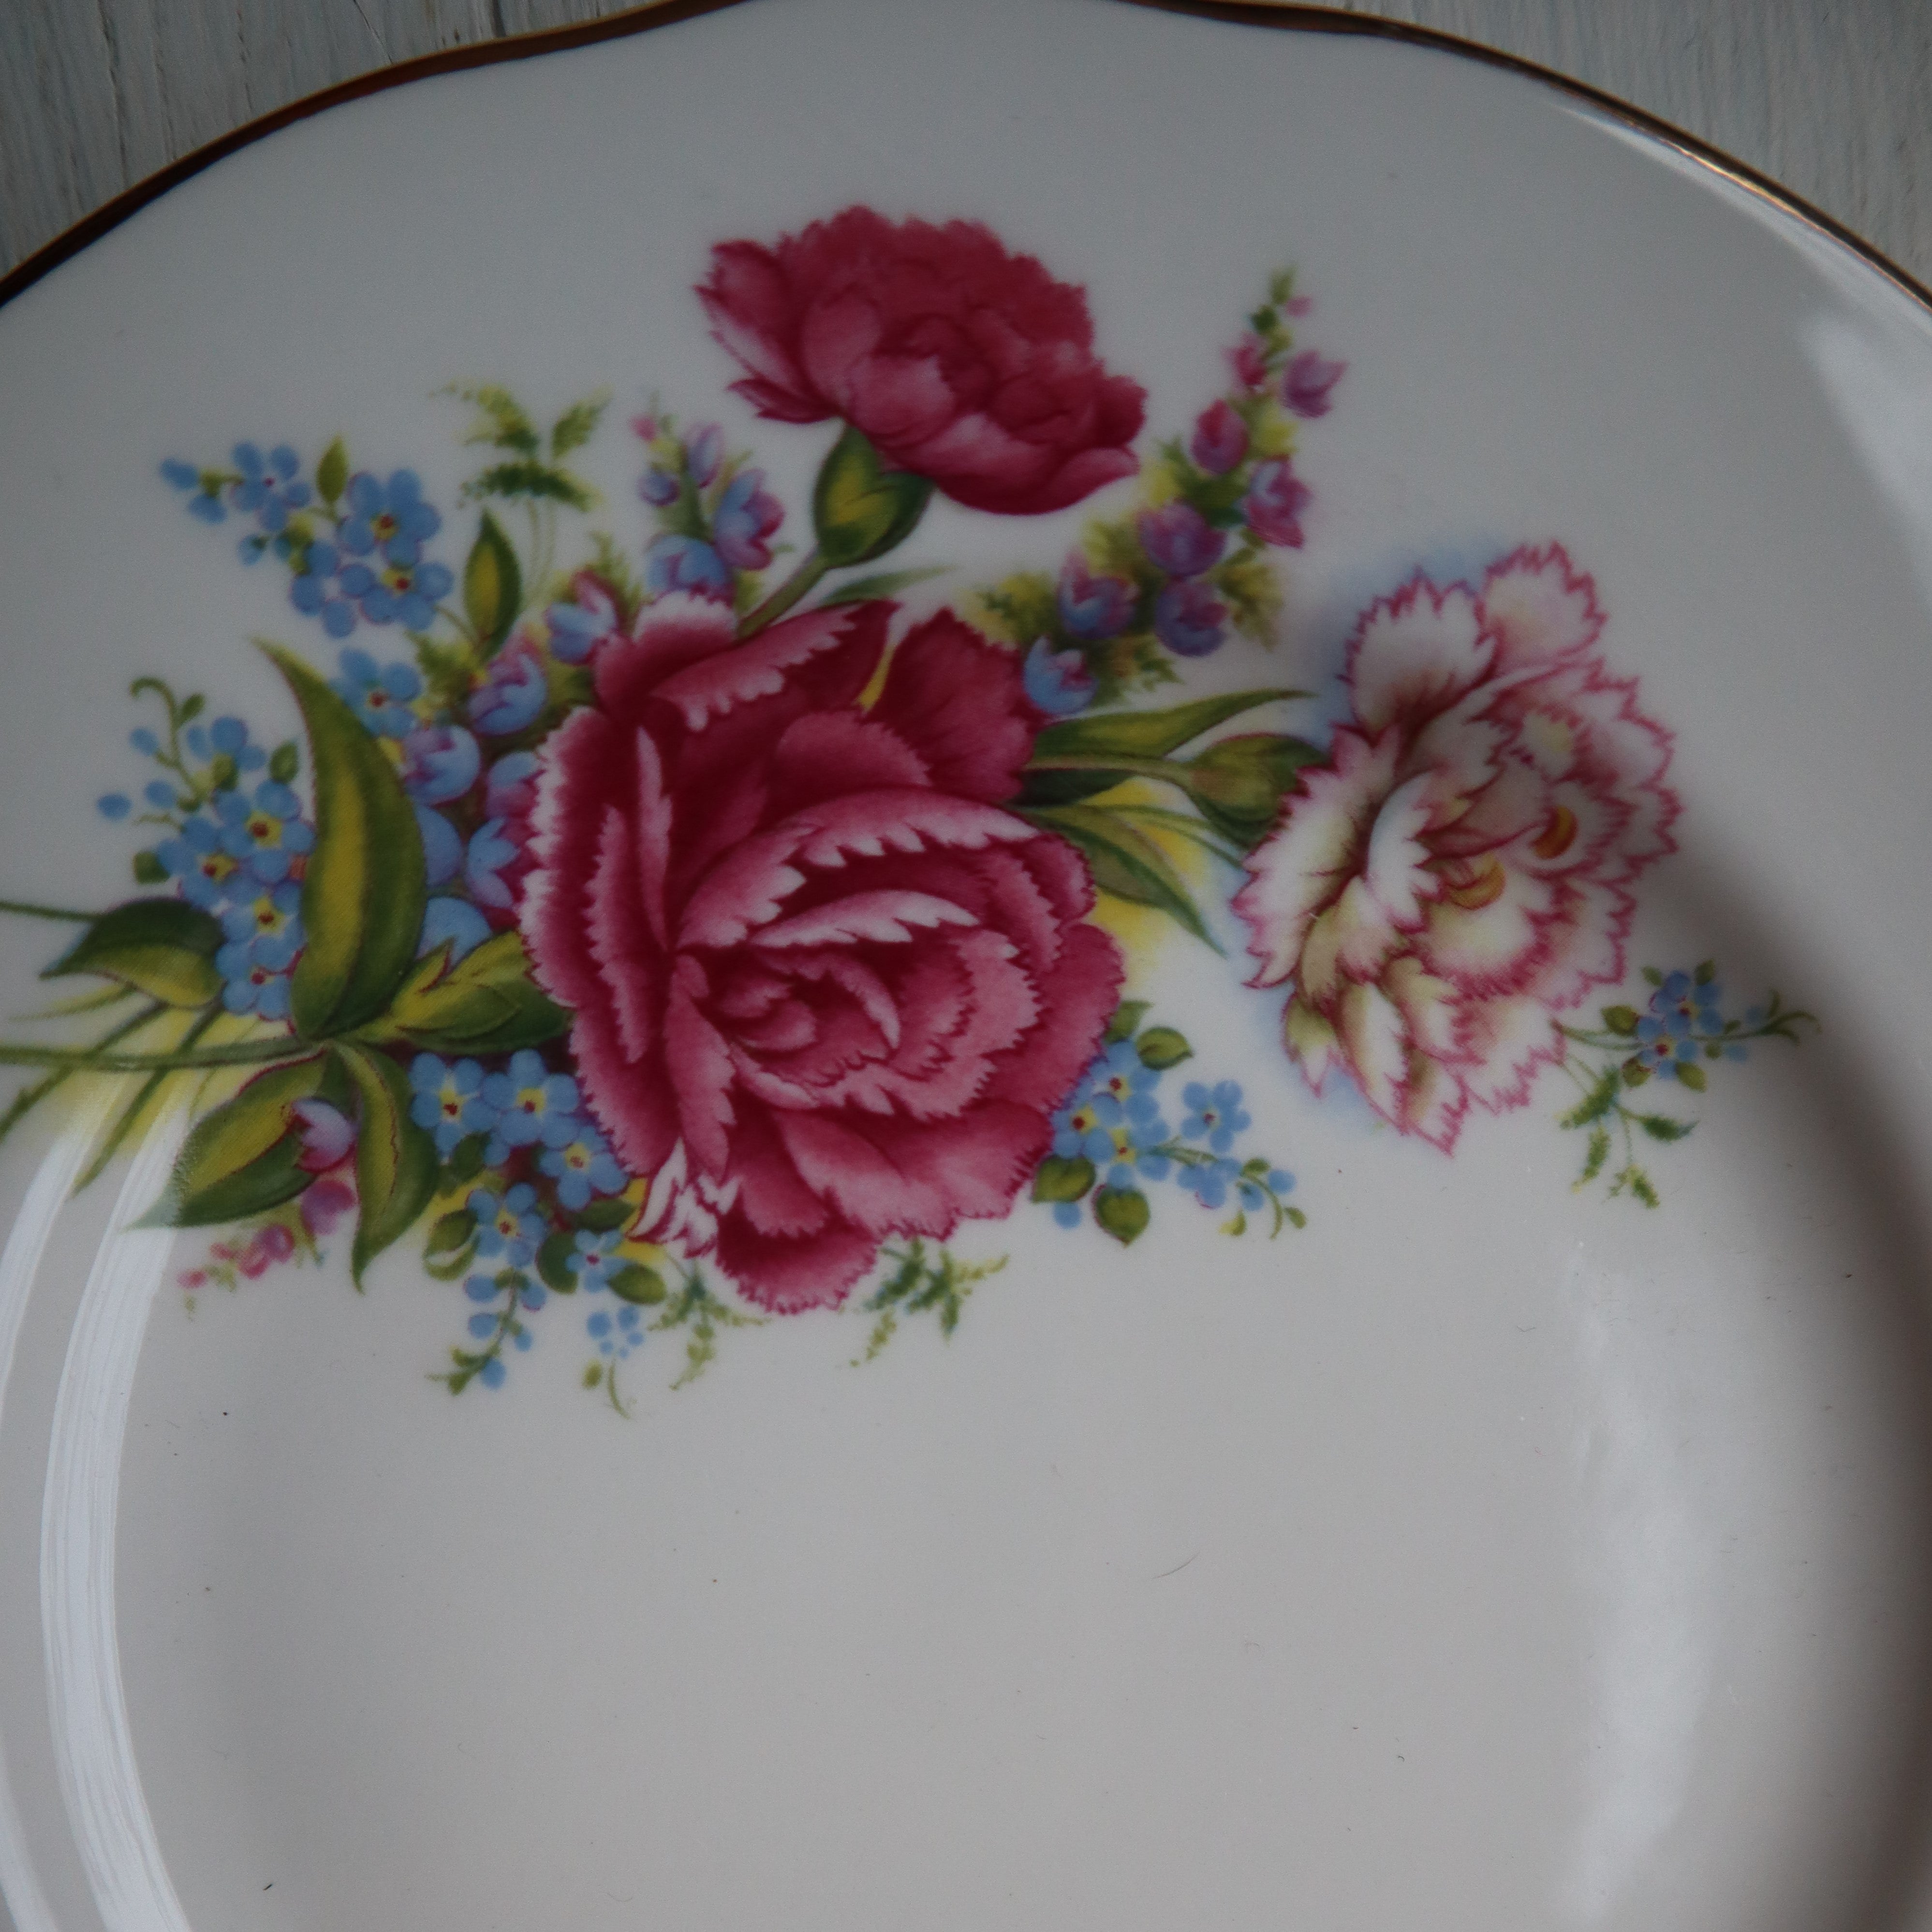 alt="vintage Duchess china plate with detail of dainty flowers. Mismatched china available from Bramble and Fox UK hygge shop